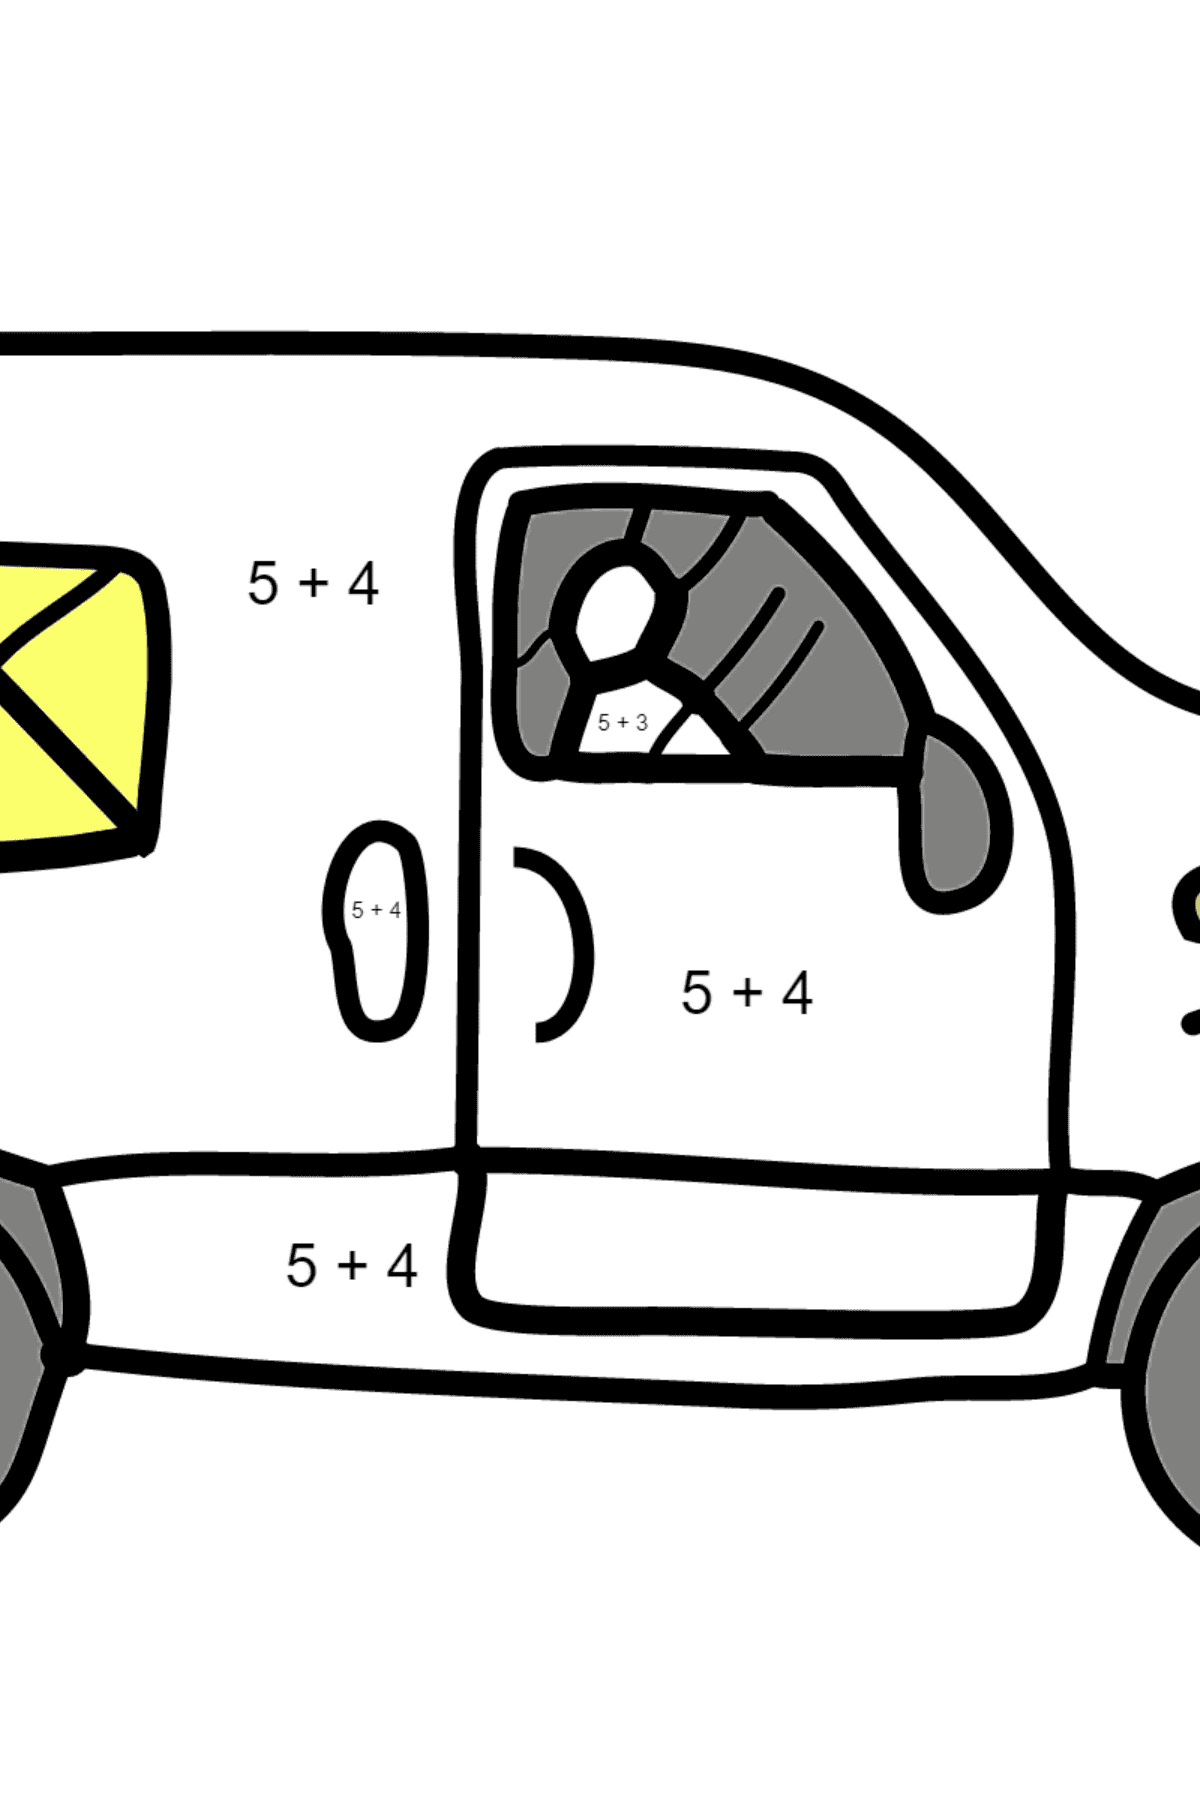 Coloring Page - A Car is Carrying Mail - Math Coloring - Addition for Children